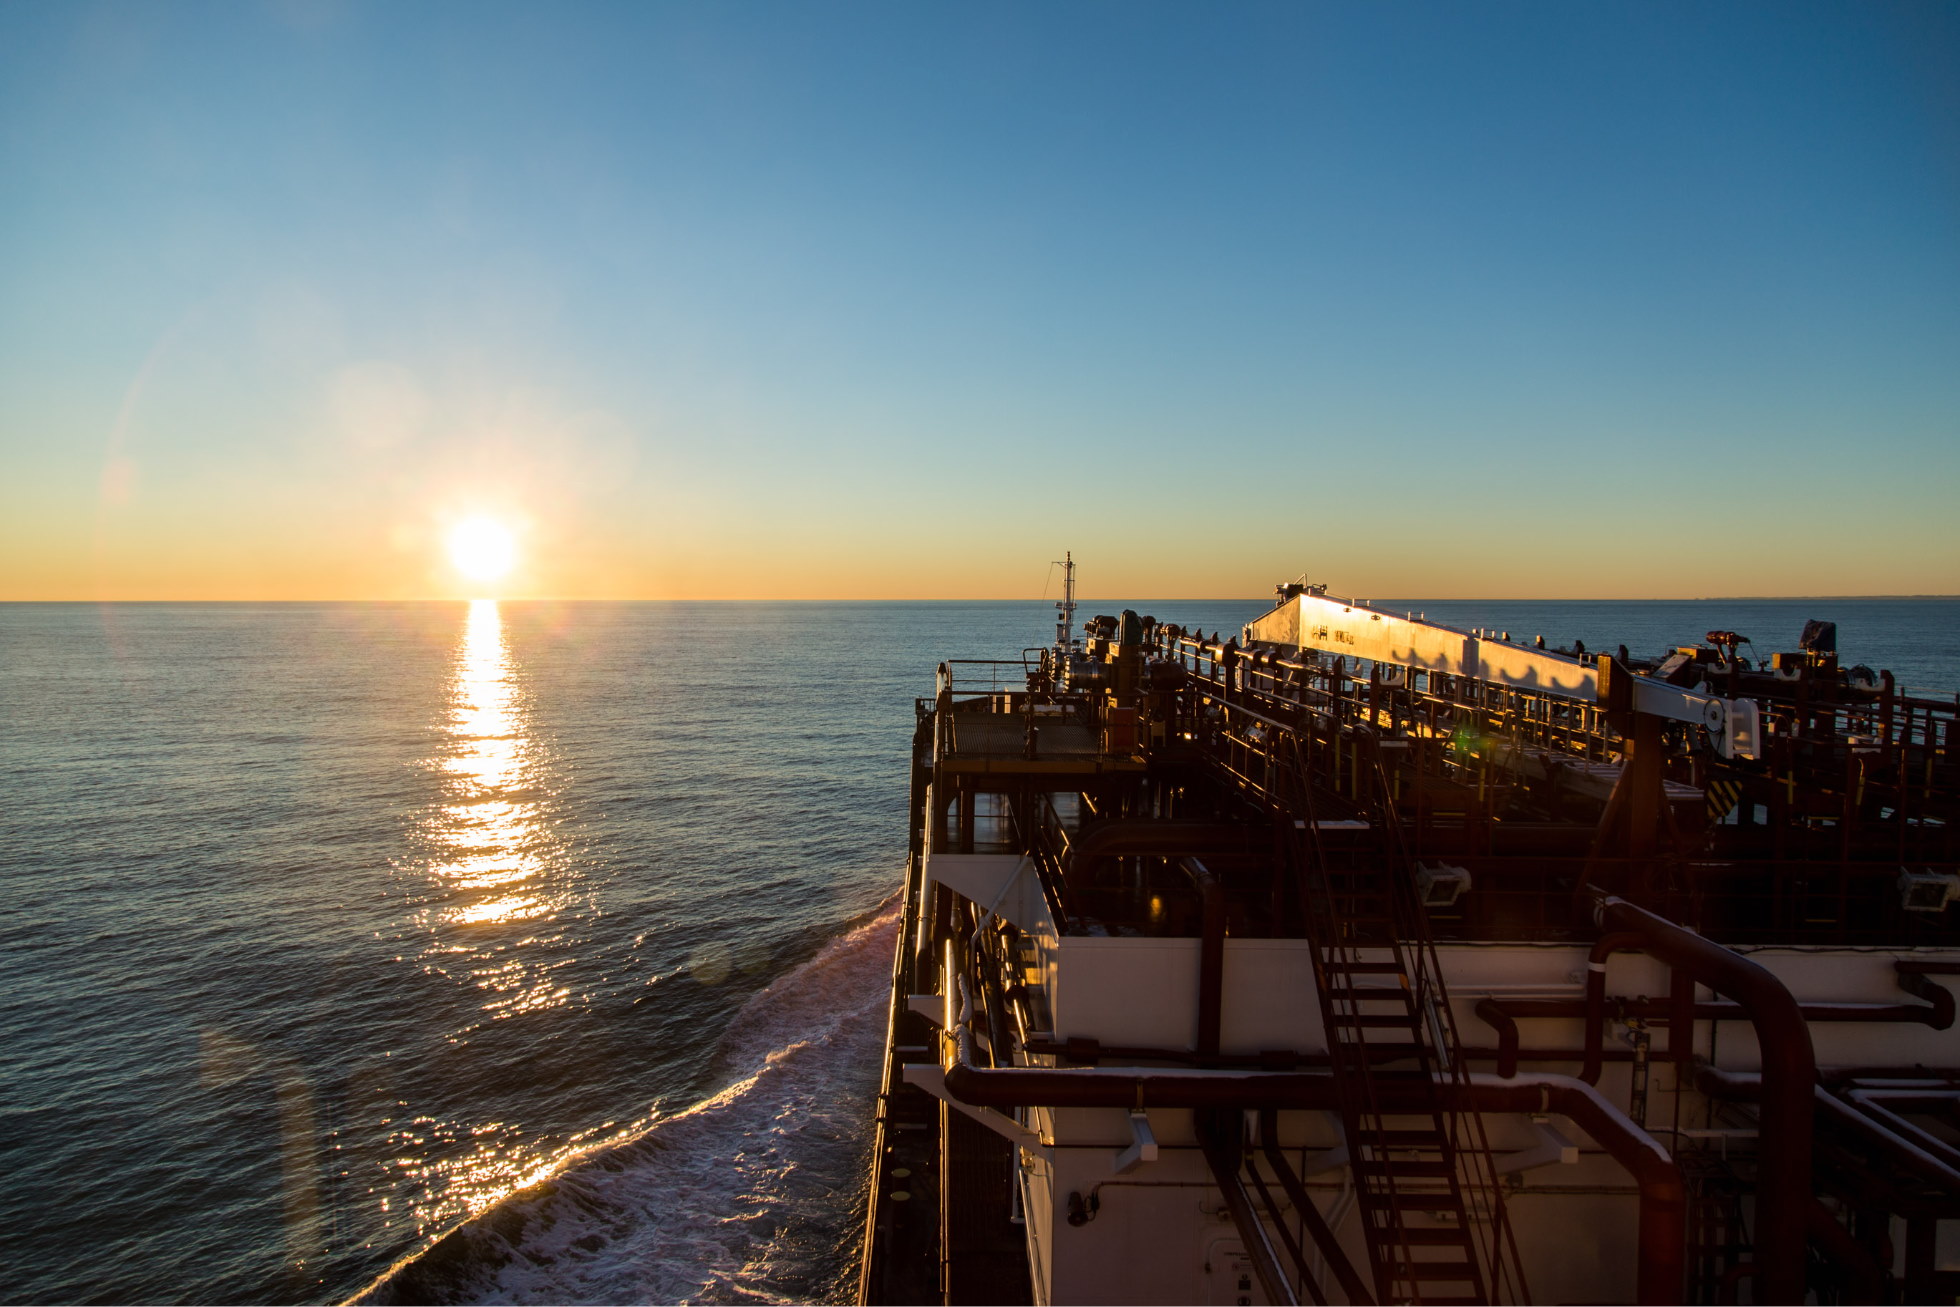 Sunset at a gas tanker photo